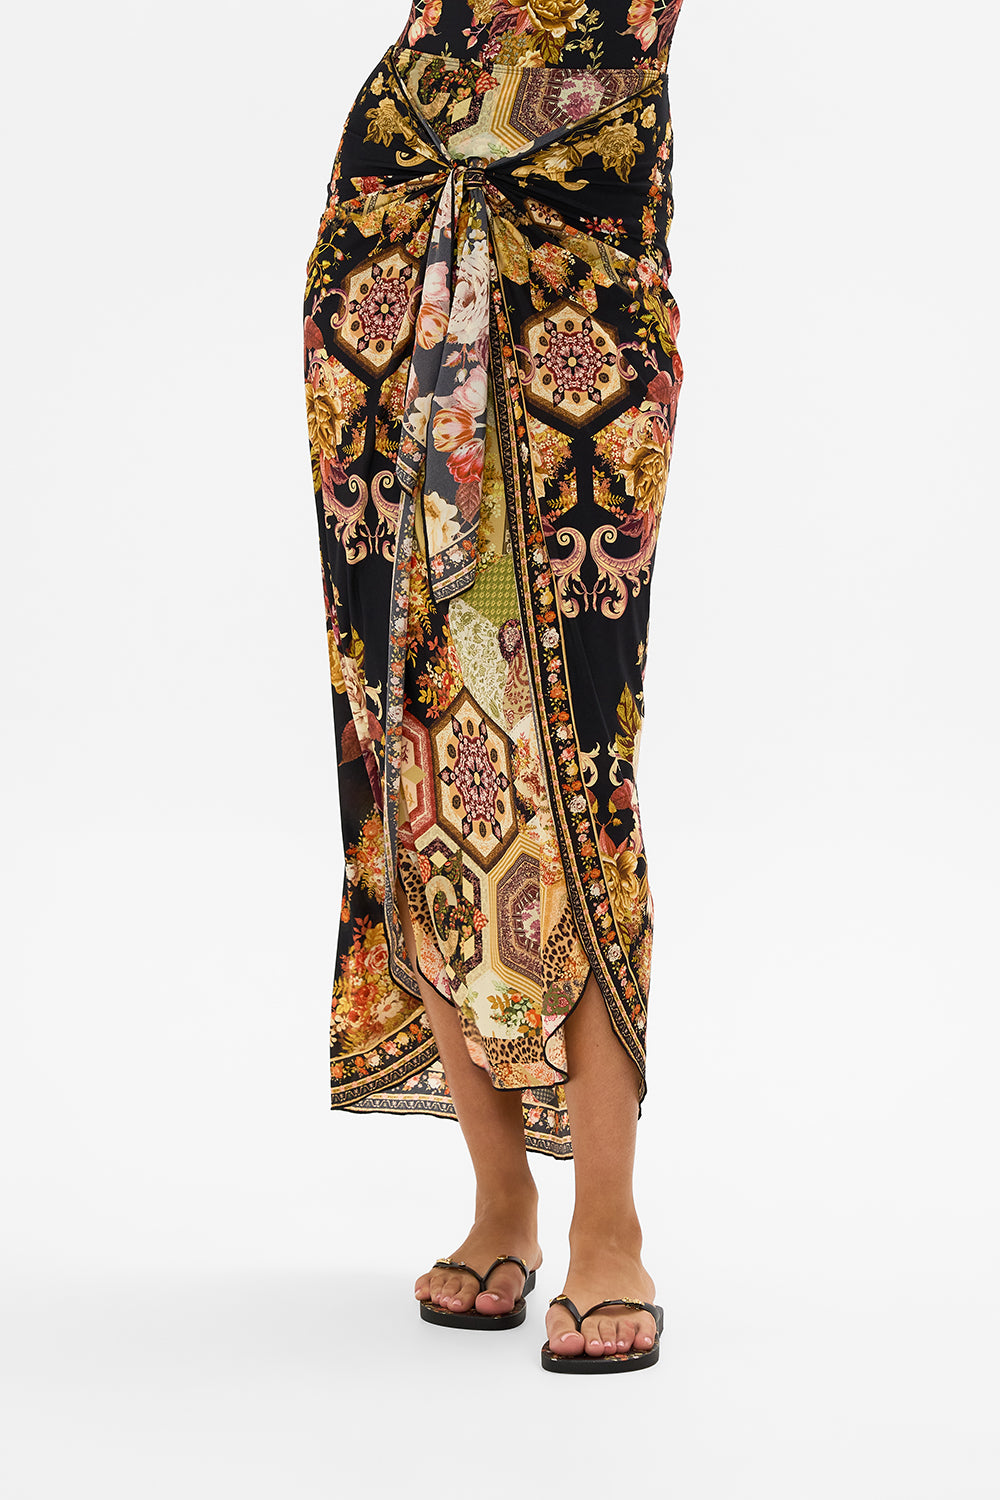 CAMILLA floral layered long sarong with front tie in Stitched in Time